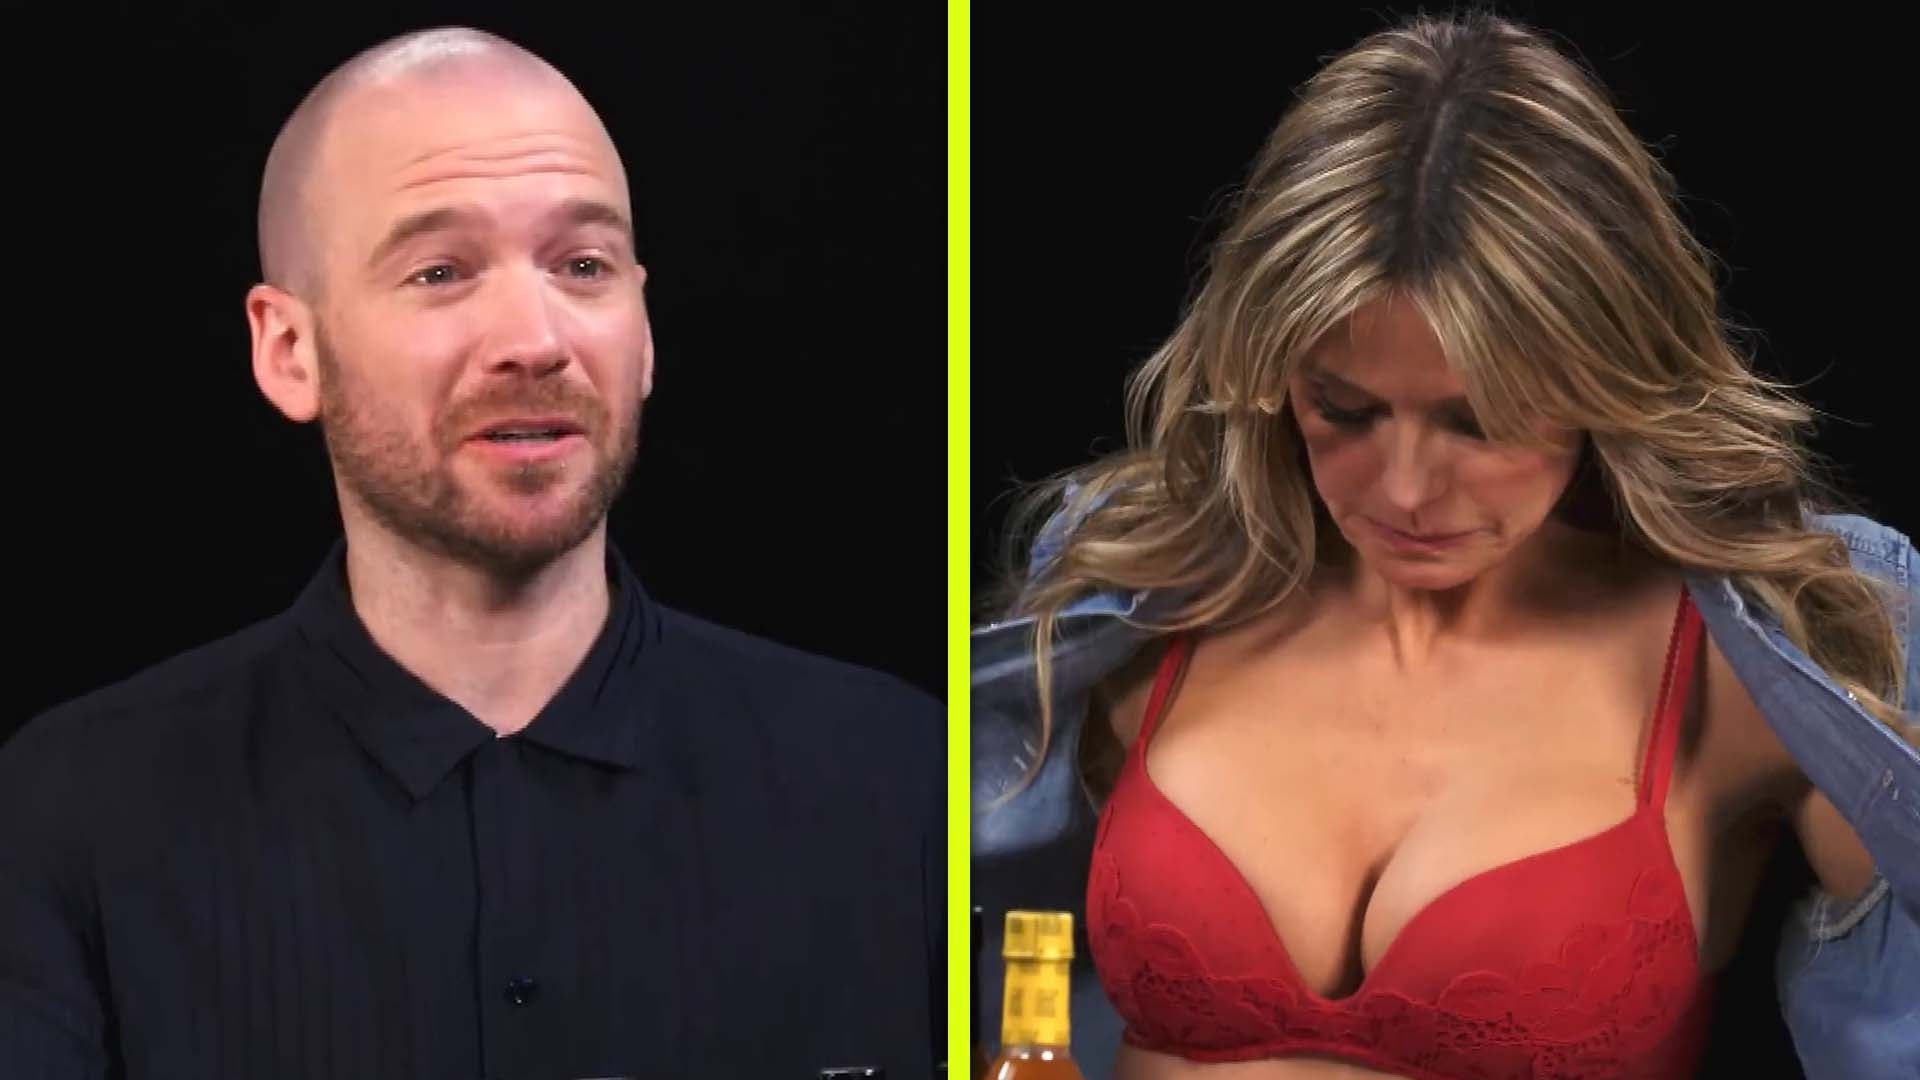 Heidi Klum Leaves ‘Hot Ones’ Host Shocked After Stripping Down Mid-Interview